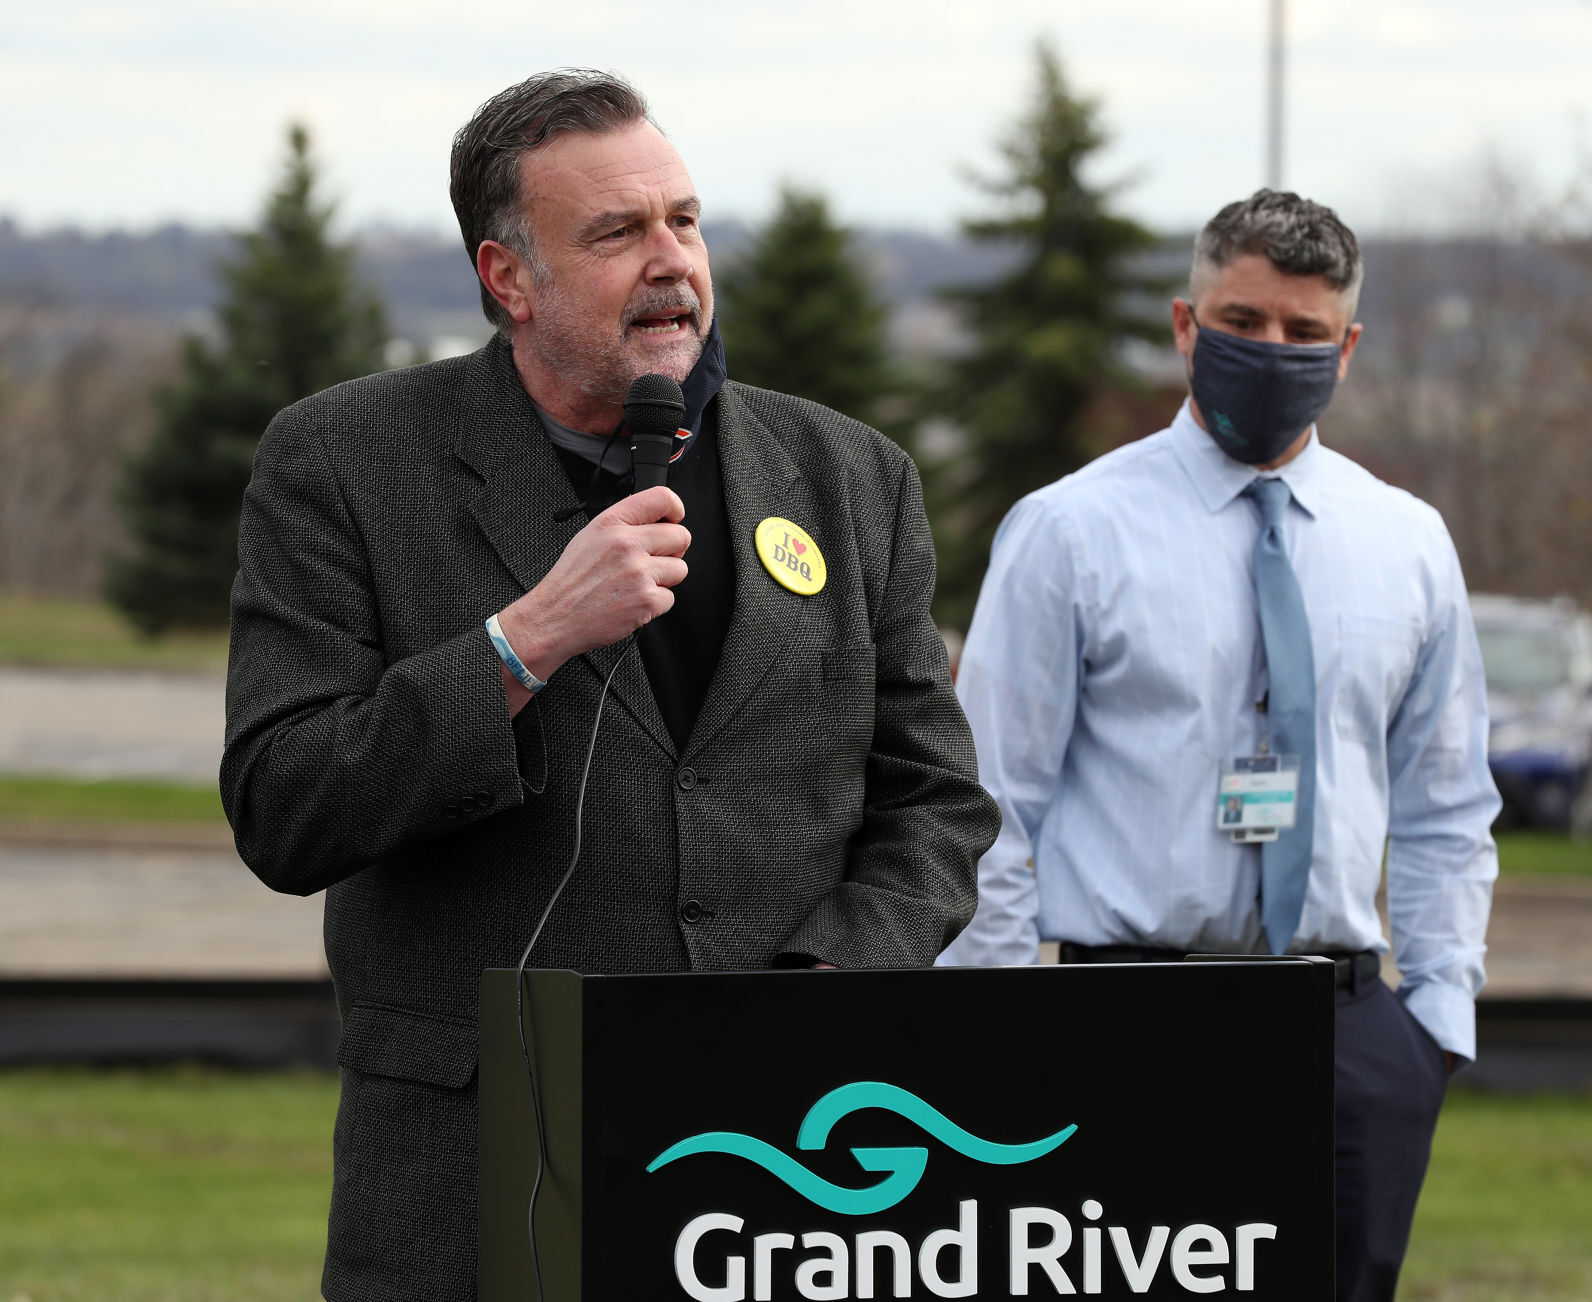 Dan Sullivan, of Grand River Medical Group, speaks Thursday during an event to commemorate the groundbreaking for the new Grand River Medical Group building on Westmark Drive in Dubuque. PHOTO CREDIT: Stephen Gassman